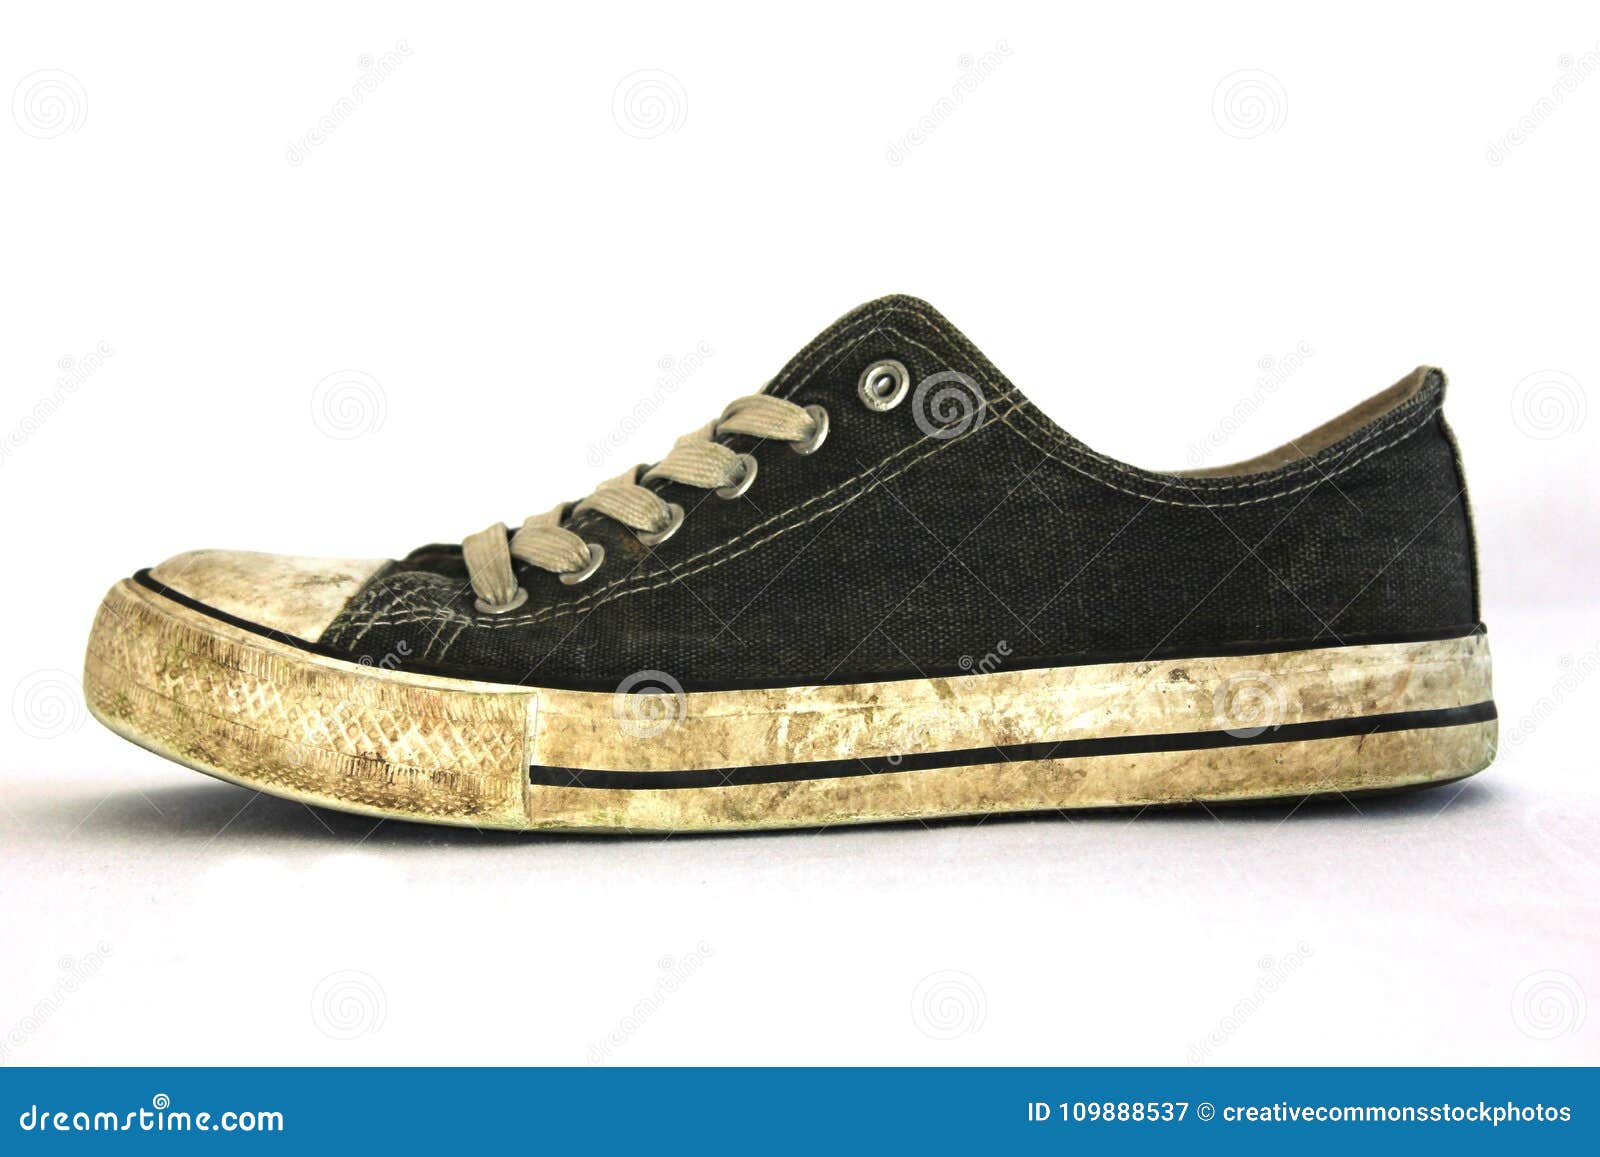 Black White Low Tops Sneakers Picture. Image: 109888537